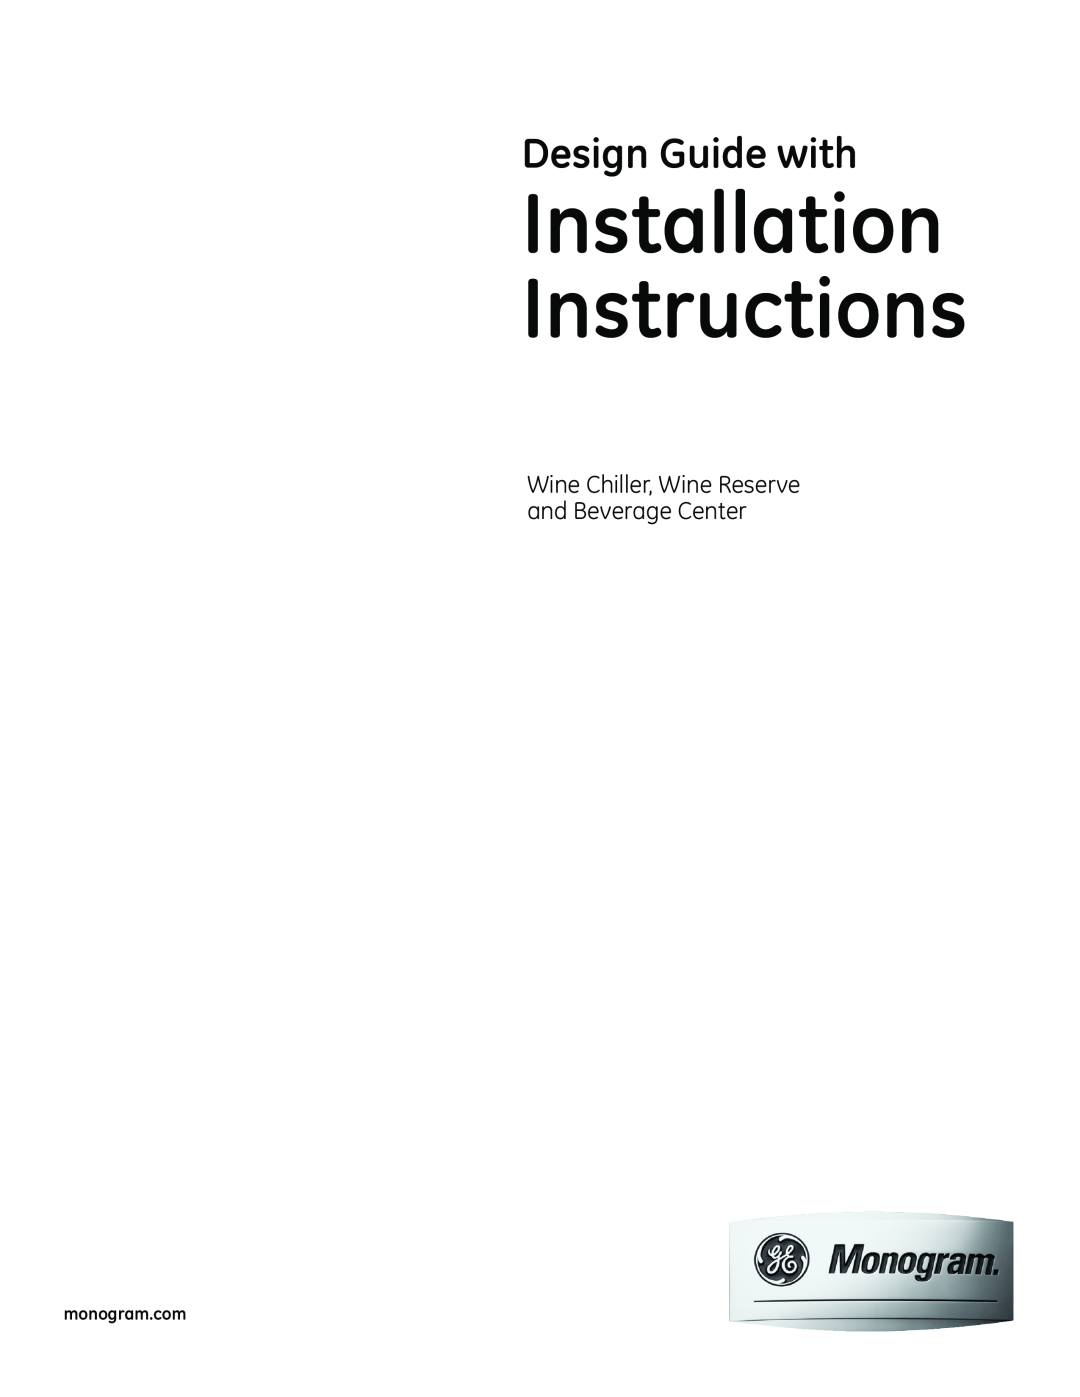 GE r10279v installation instructions Installation Instructions, Design Guide with 